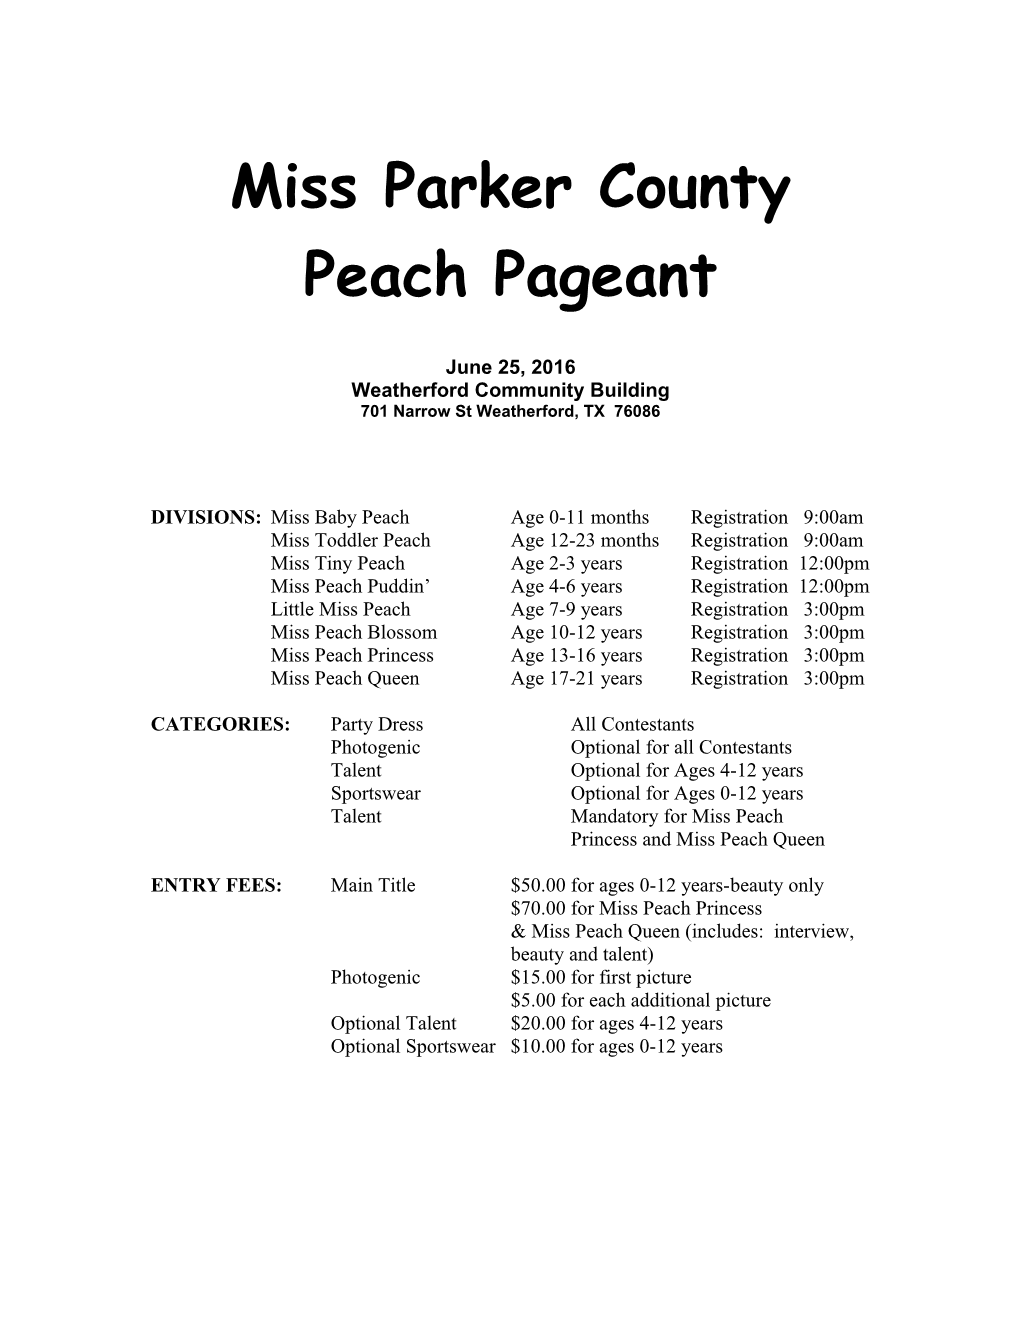 Miss Parker County